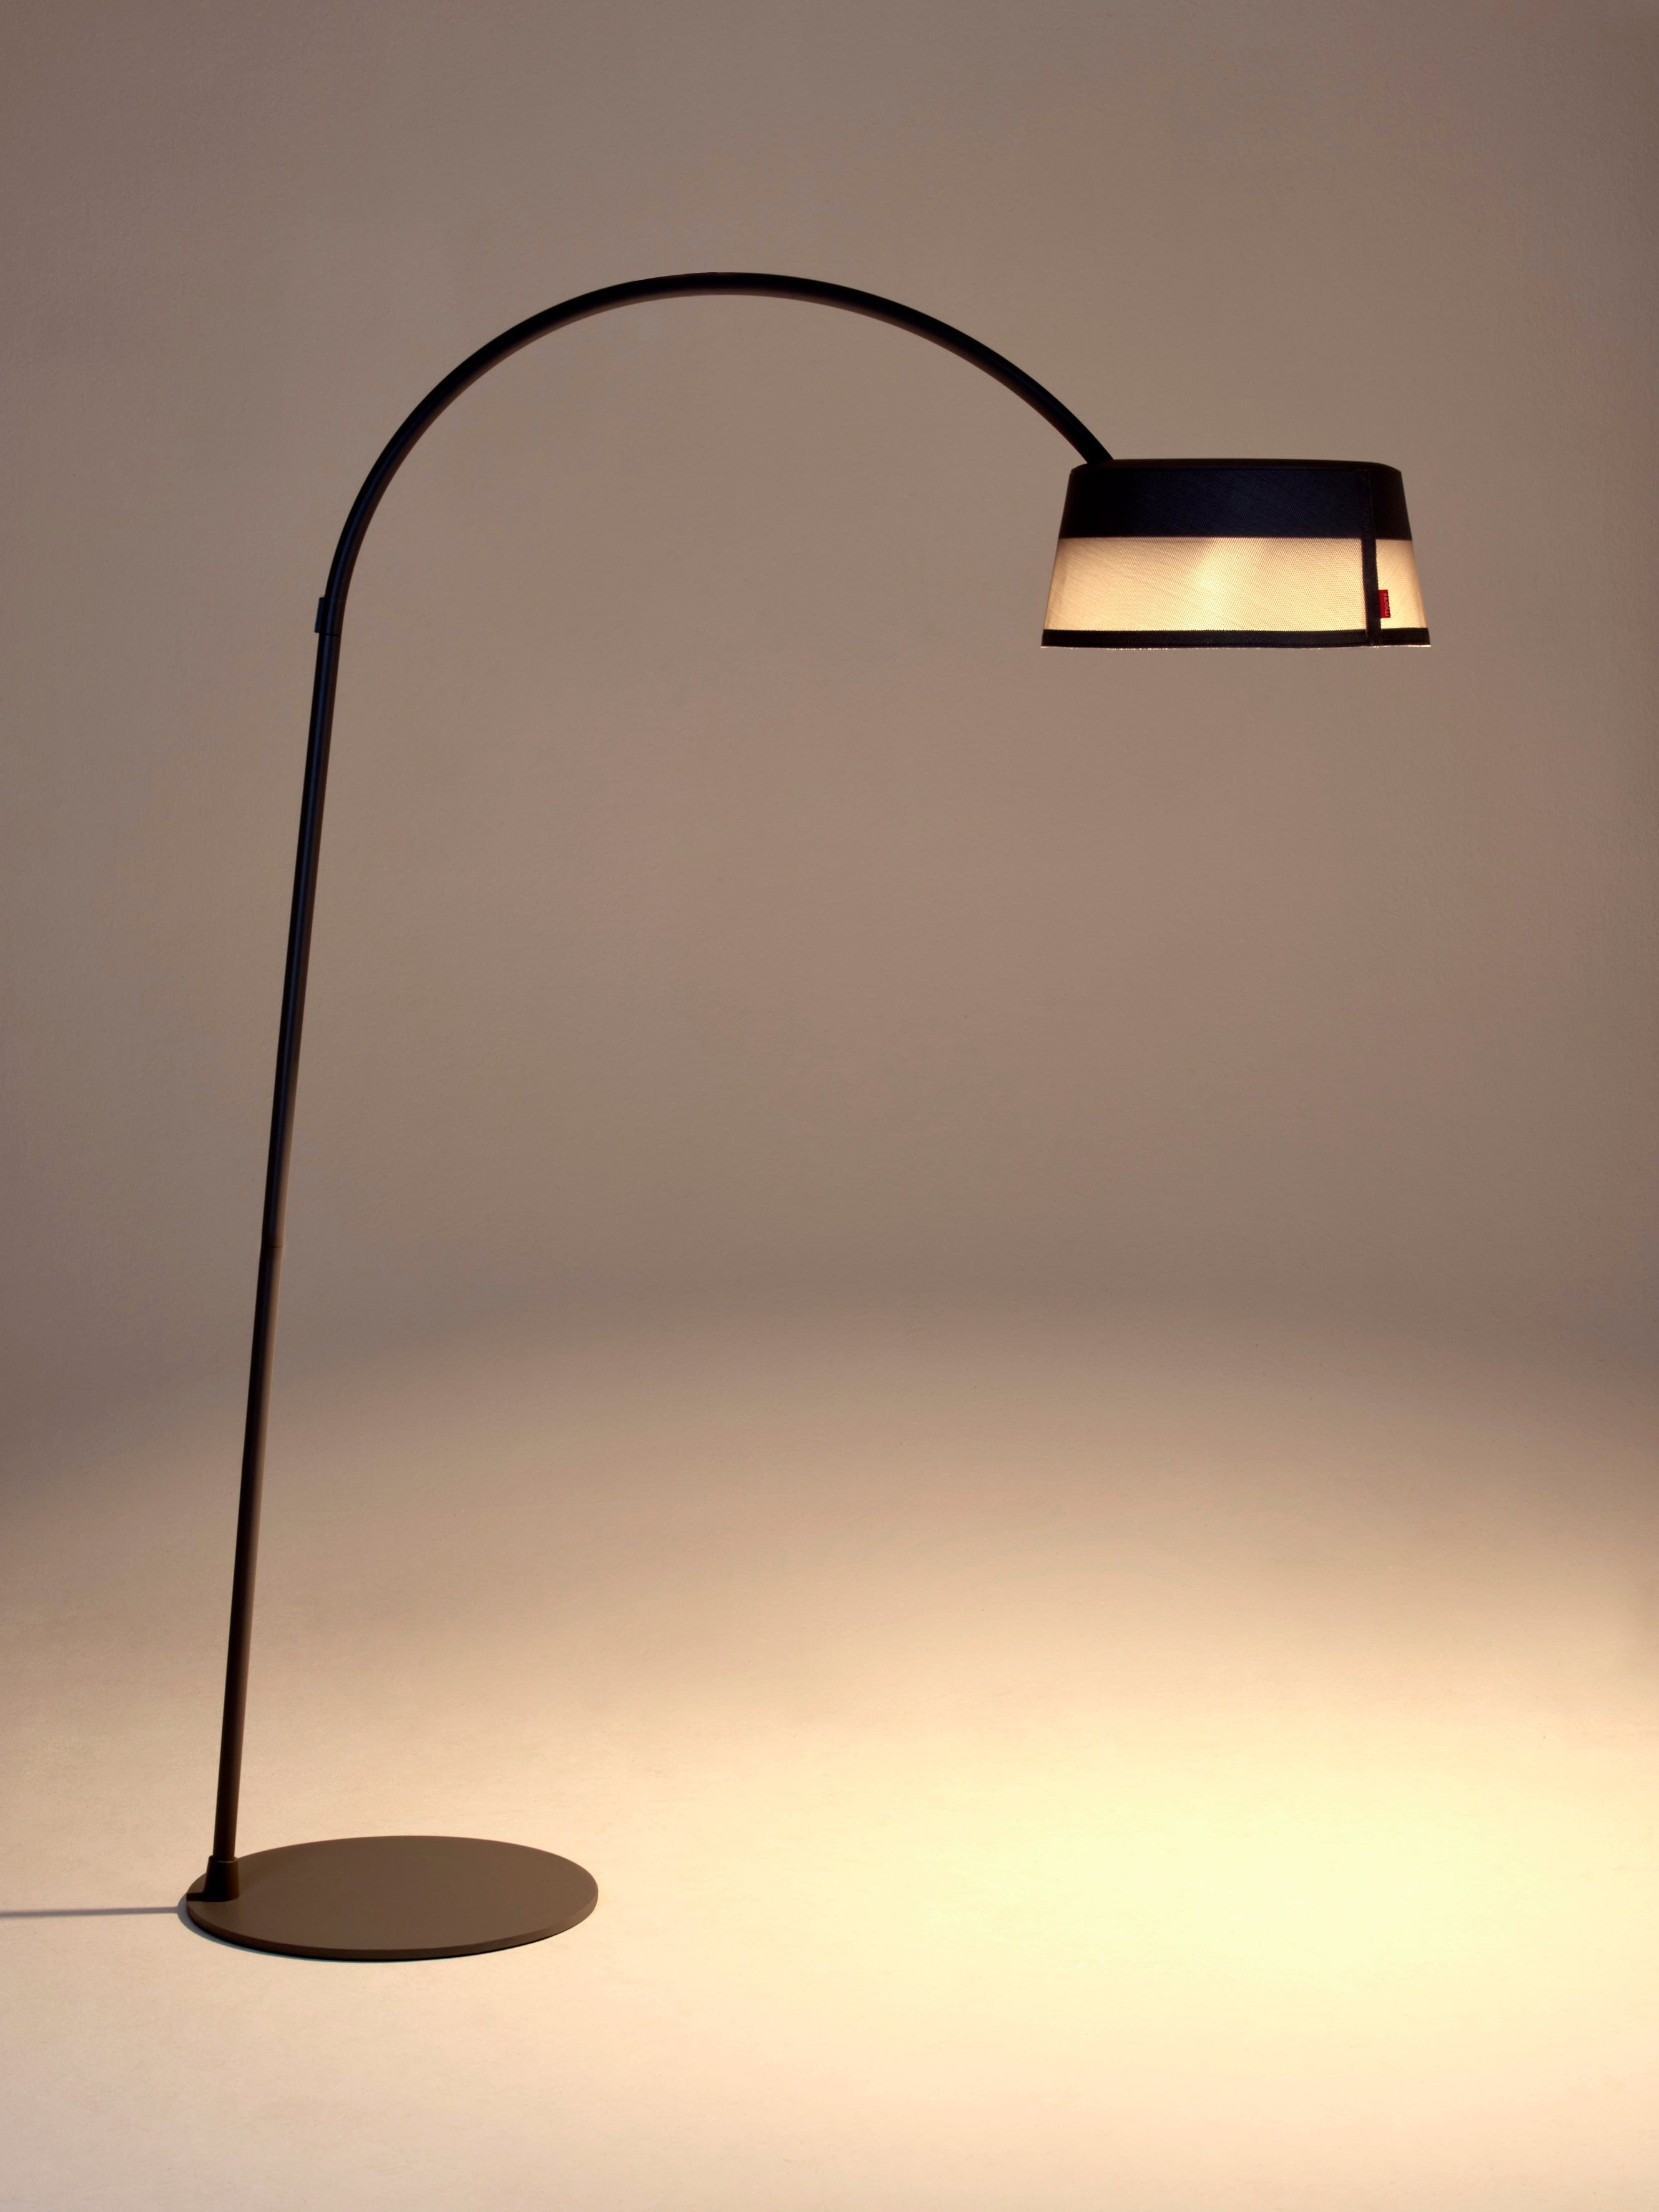 Isabelle Stehlampe 2in1